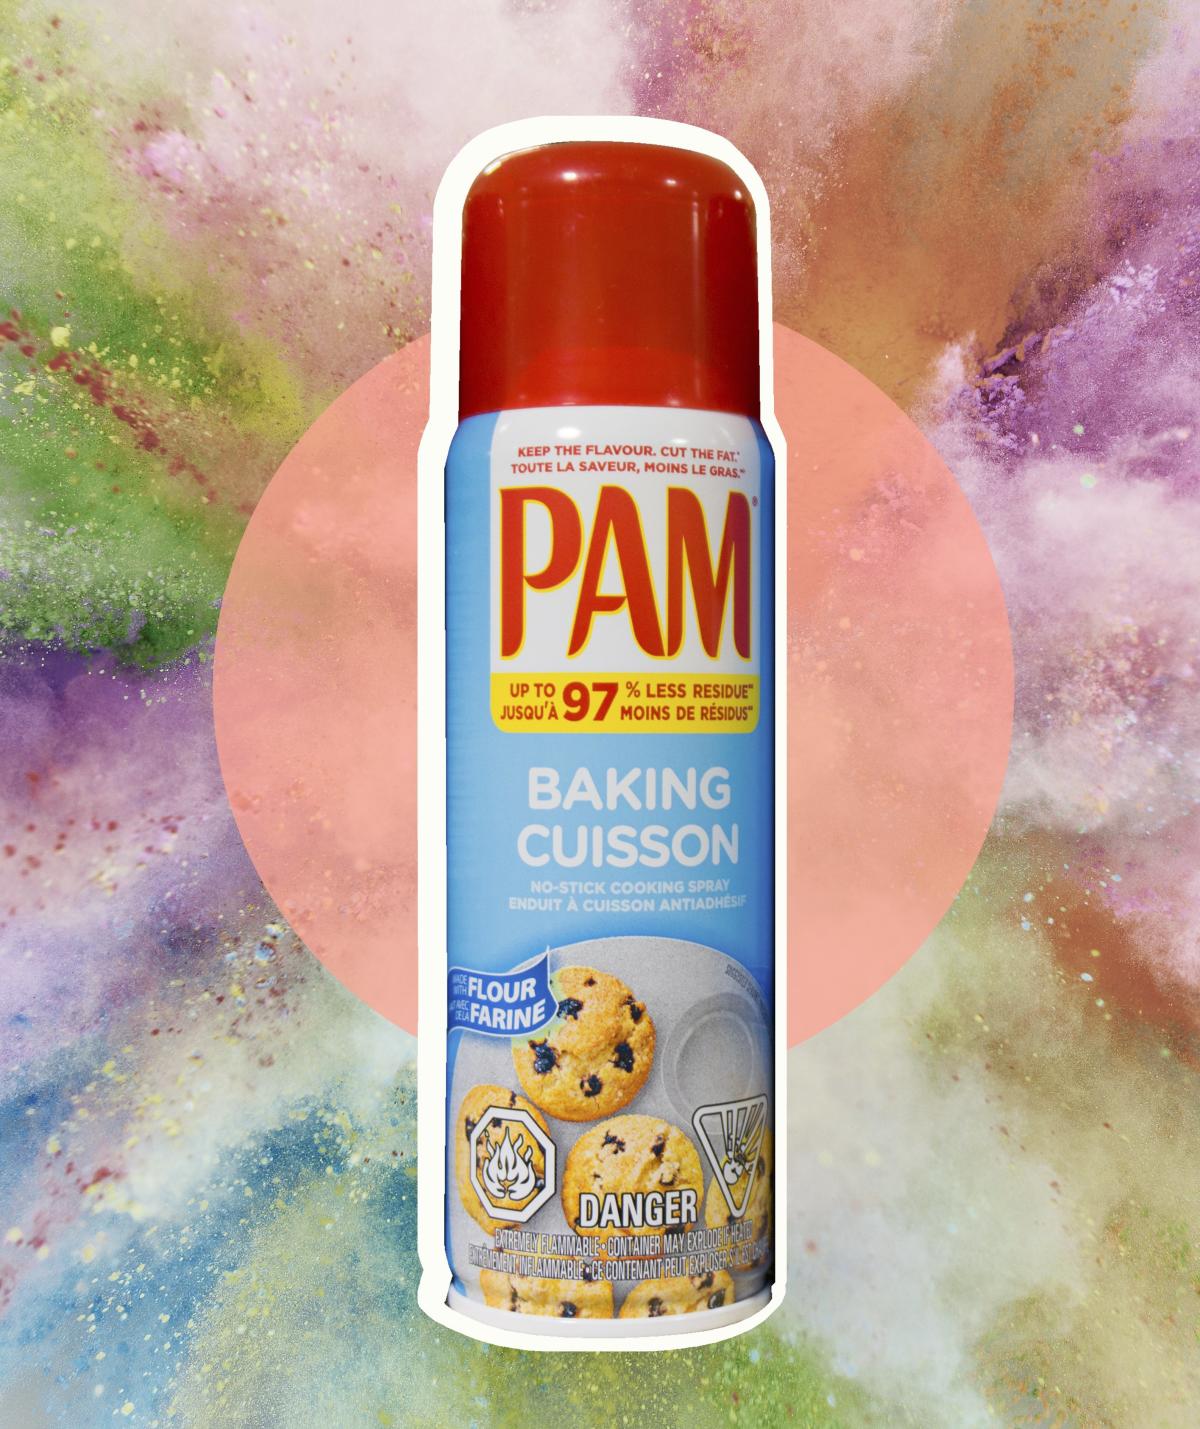 Lawsuits claim cans of Pam cooking spray are exploding: Here's what  consumers need to know